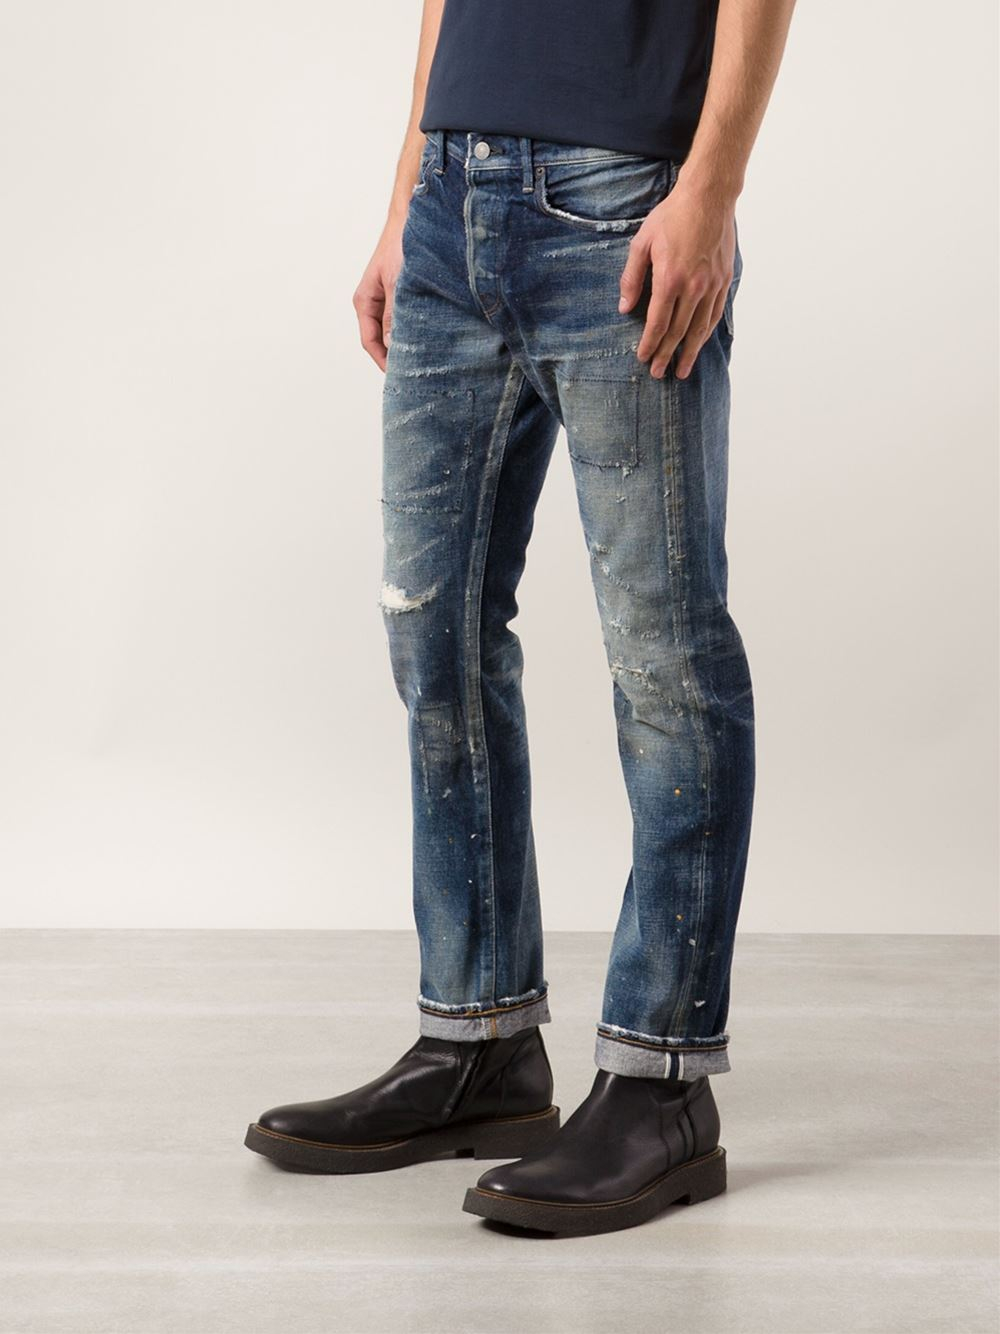 Fabric-Brand & Co. Distressed Jeans in Blue for Men - Lyst